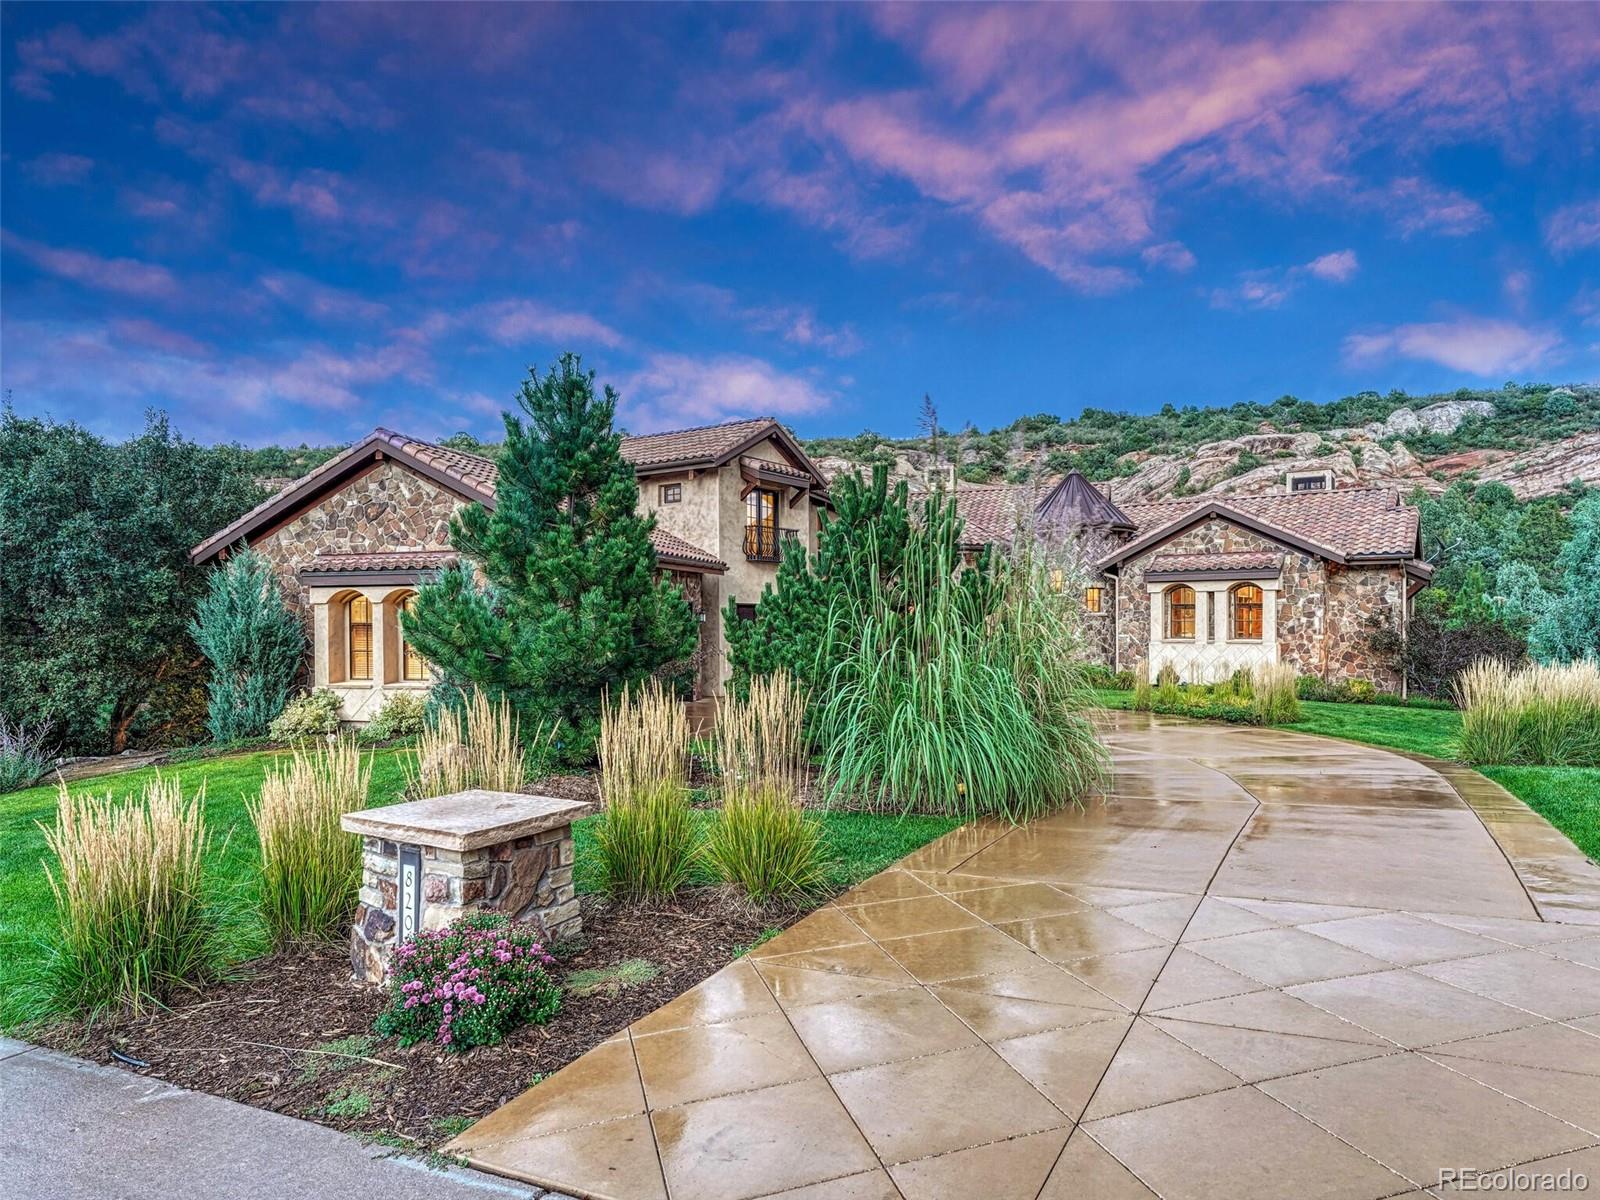 8200  dante drive, Littleton sold home. Closed on 2024-03-21 for $2,499,000.